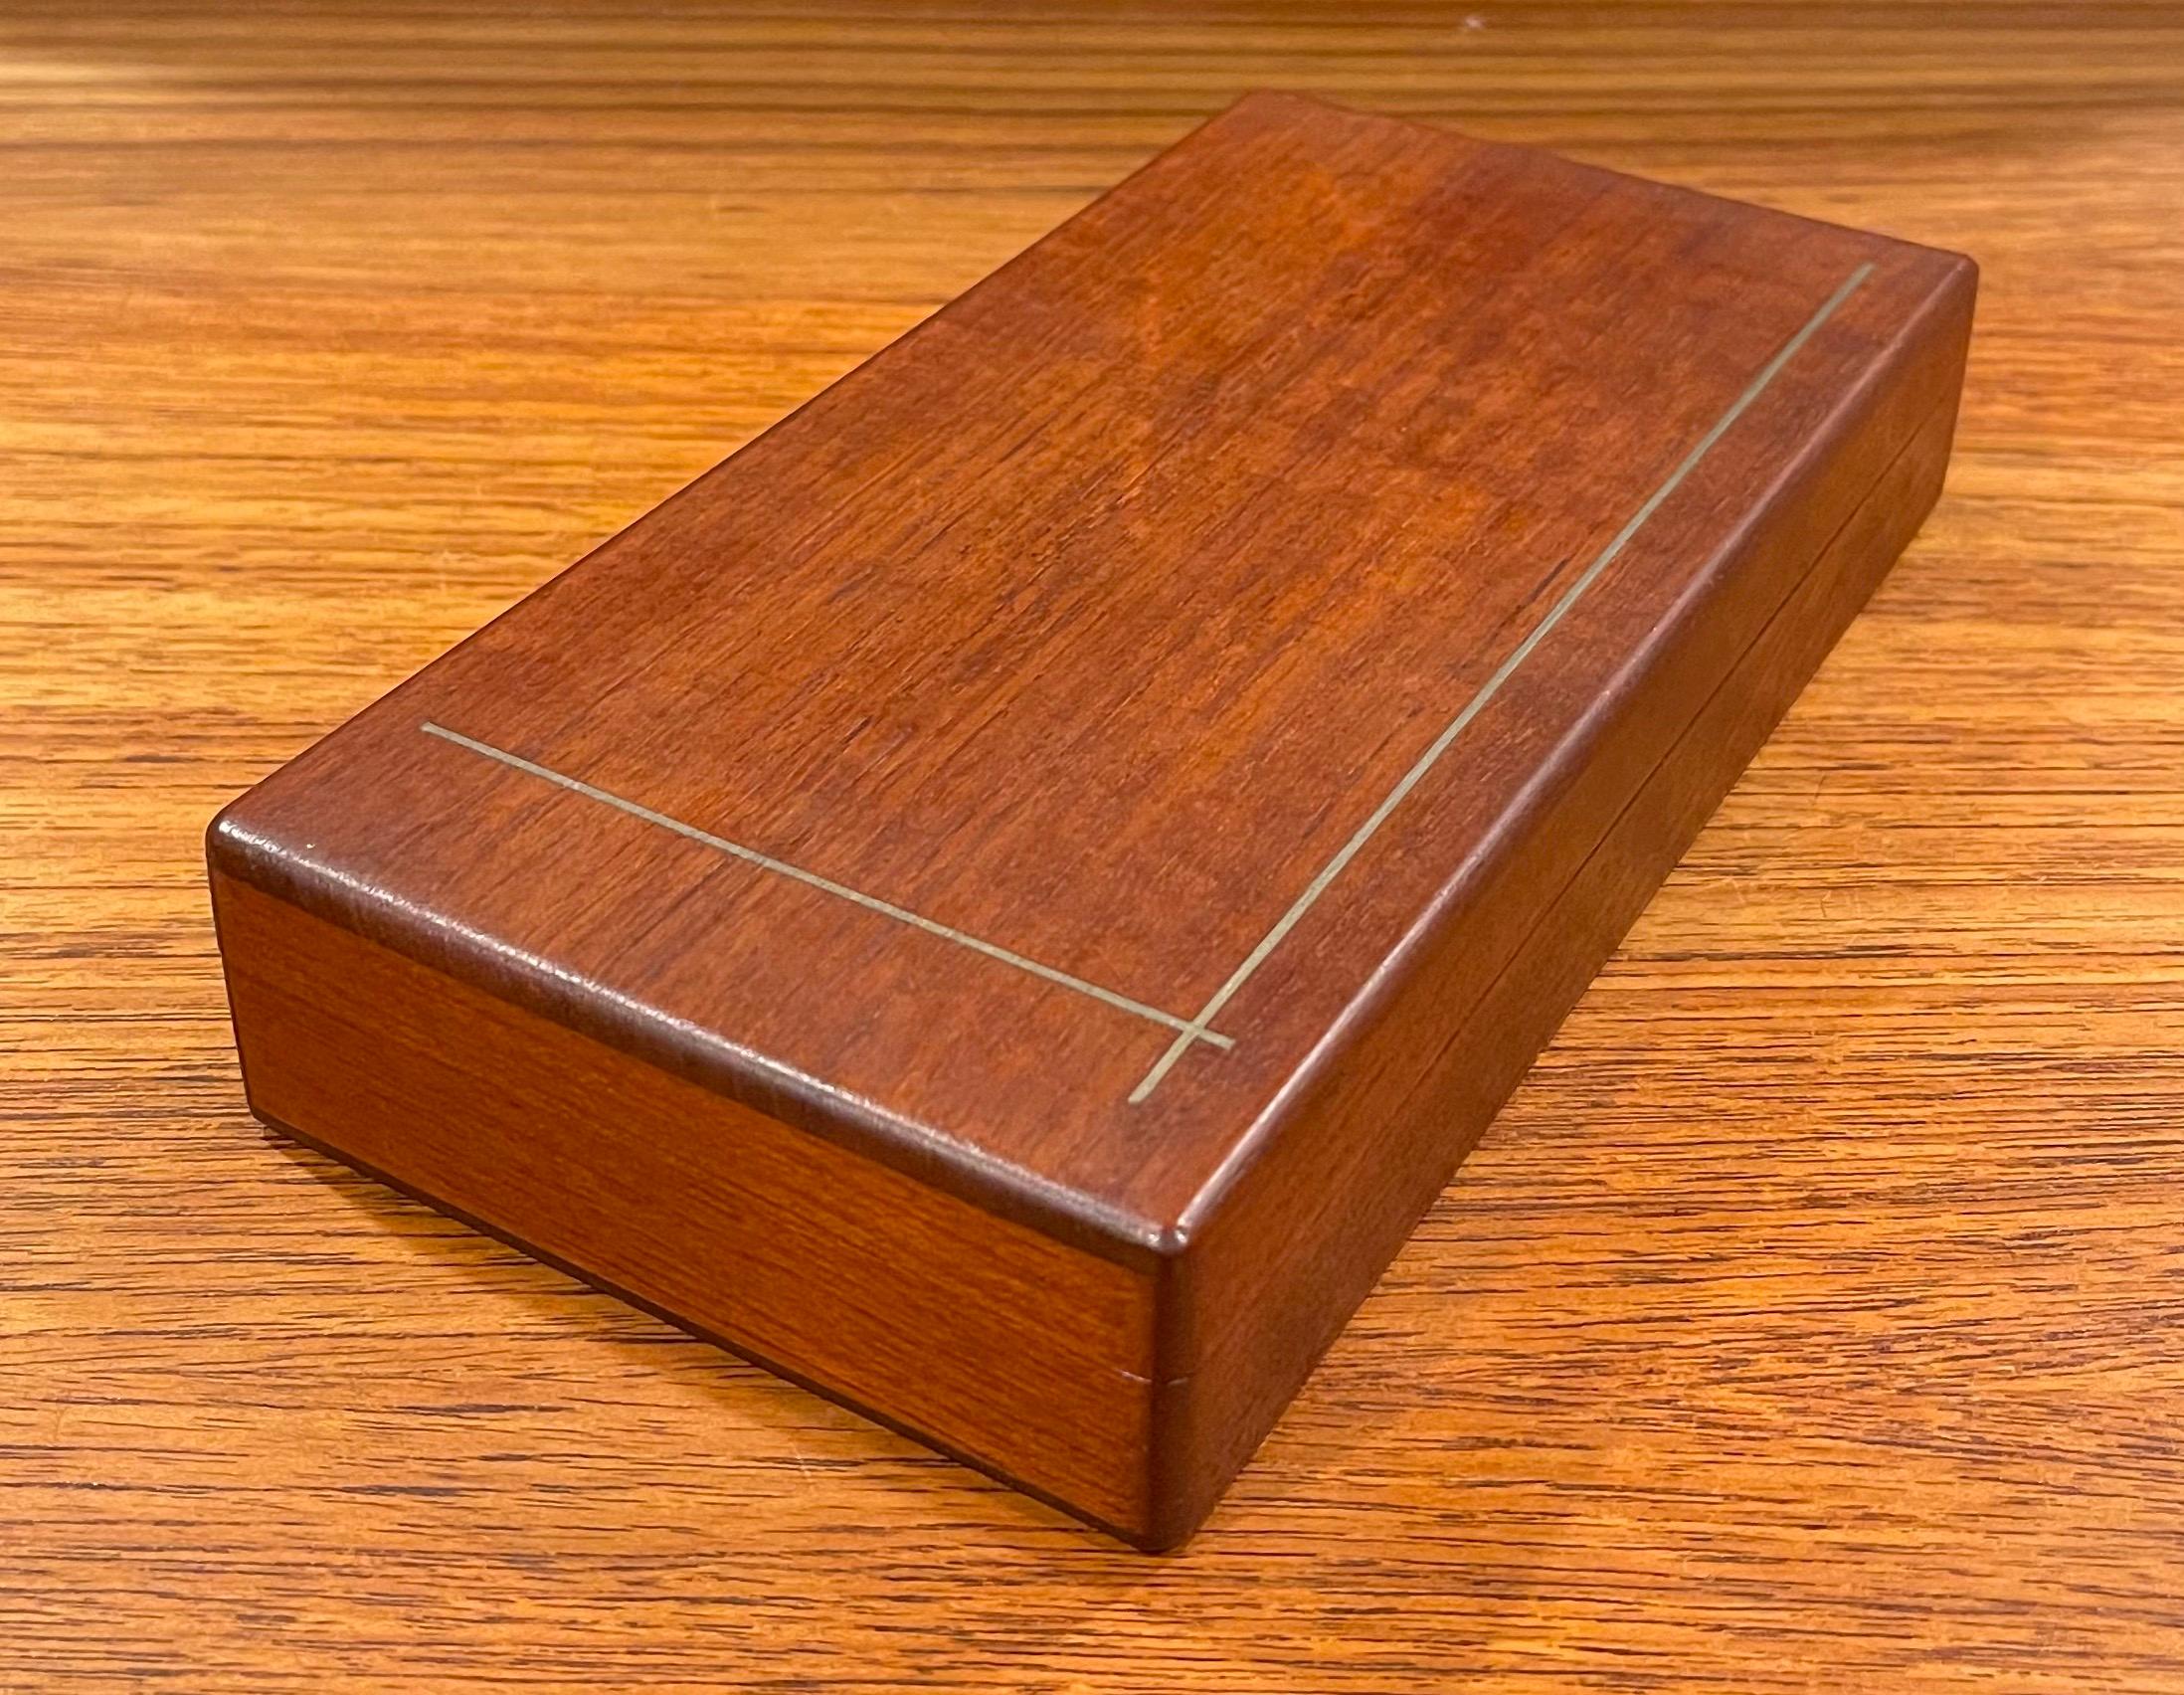 A very rare and hard to find solid teak inlaid jewelry or trinket box by Maison Gourmet of Denmark, circa 1950s. The box has a removable lid with a fine brass inlay and the inside is coated in cork; the piece measures: 8.5